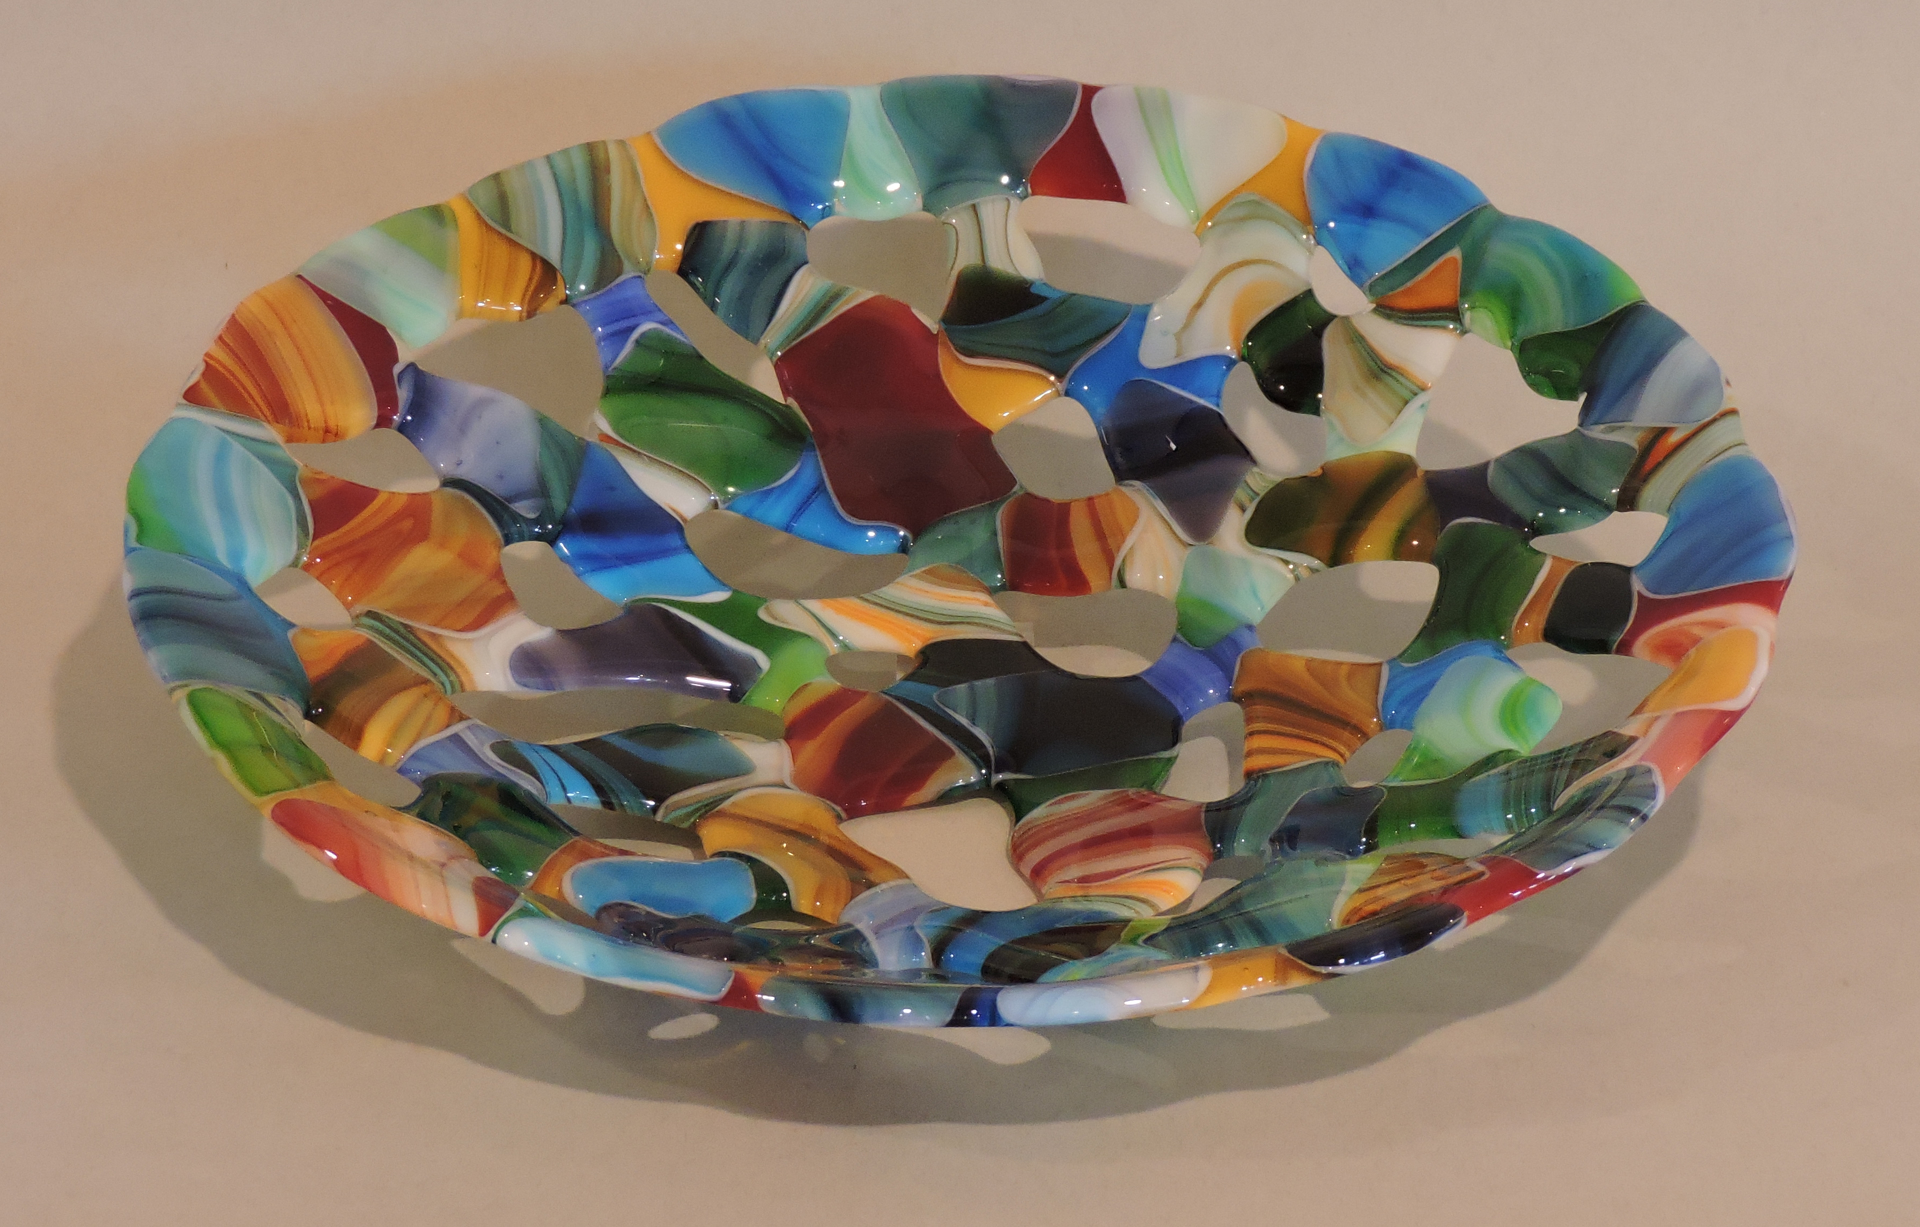 Opaque Erosion, Round Multi (Large) by Engler Glass